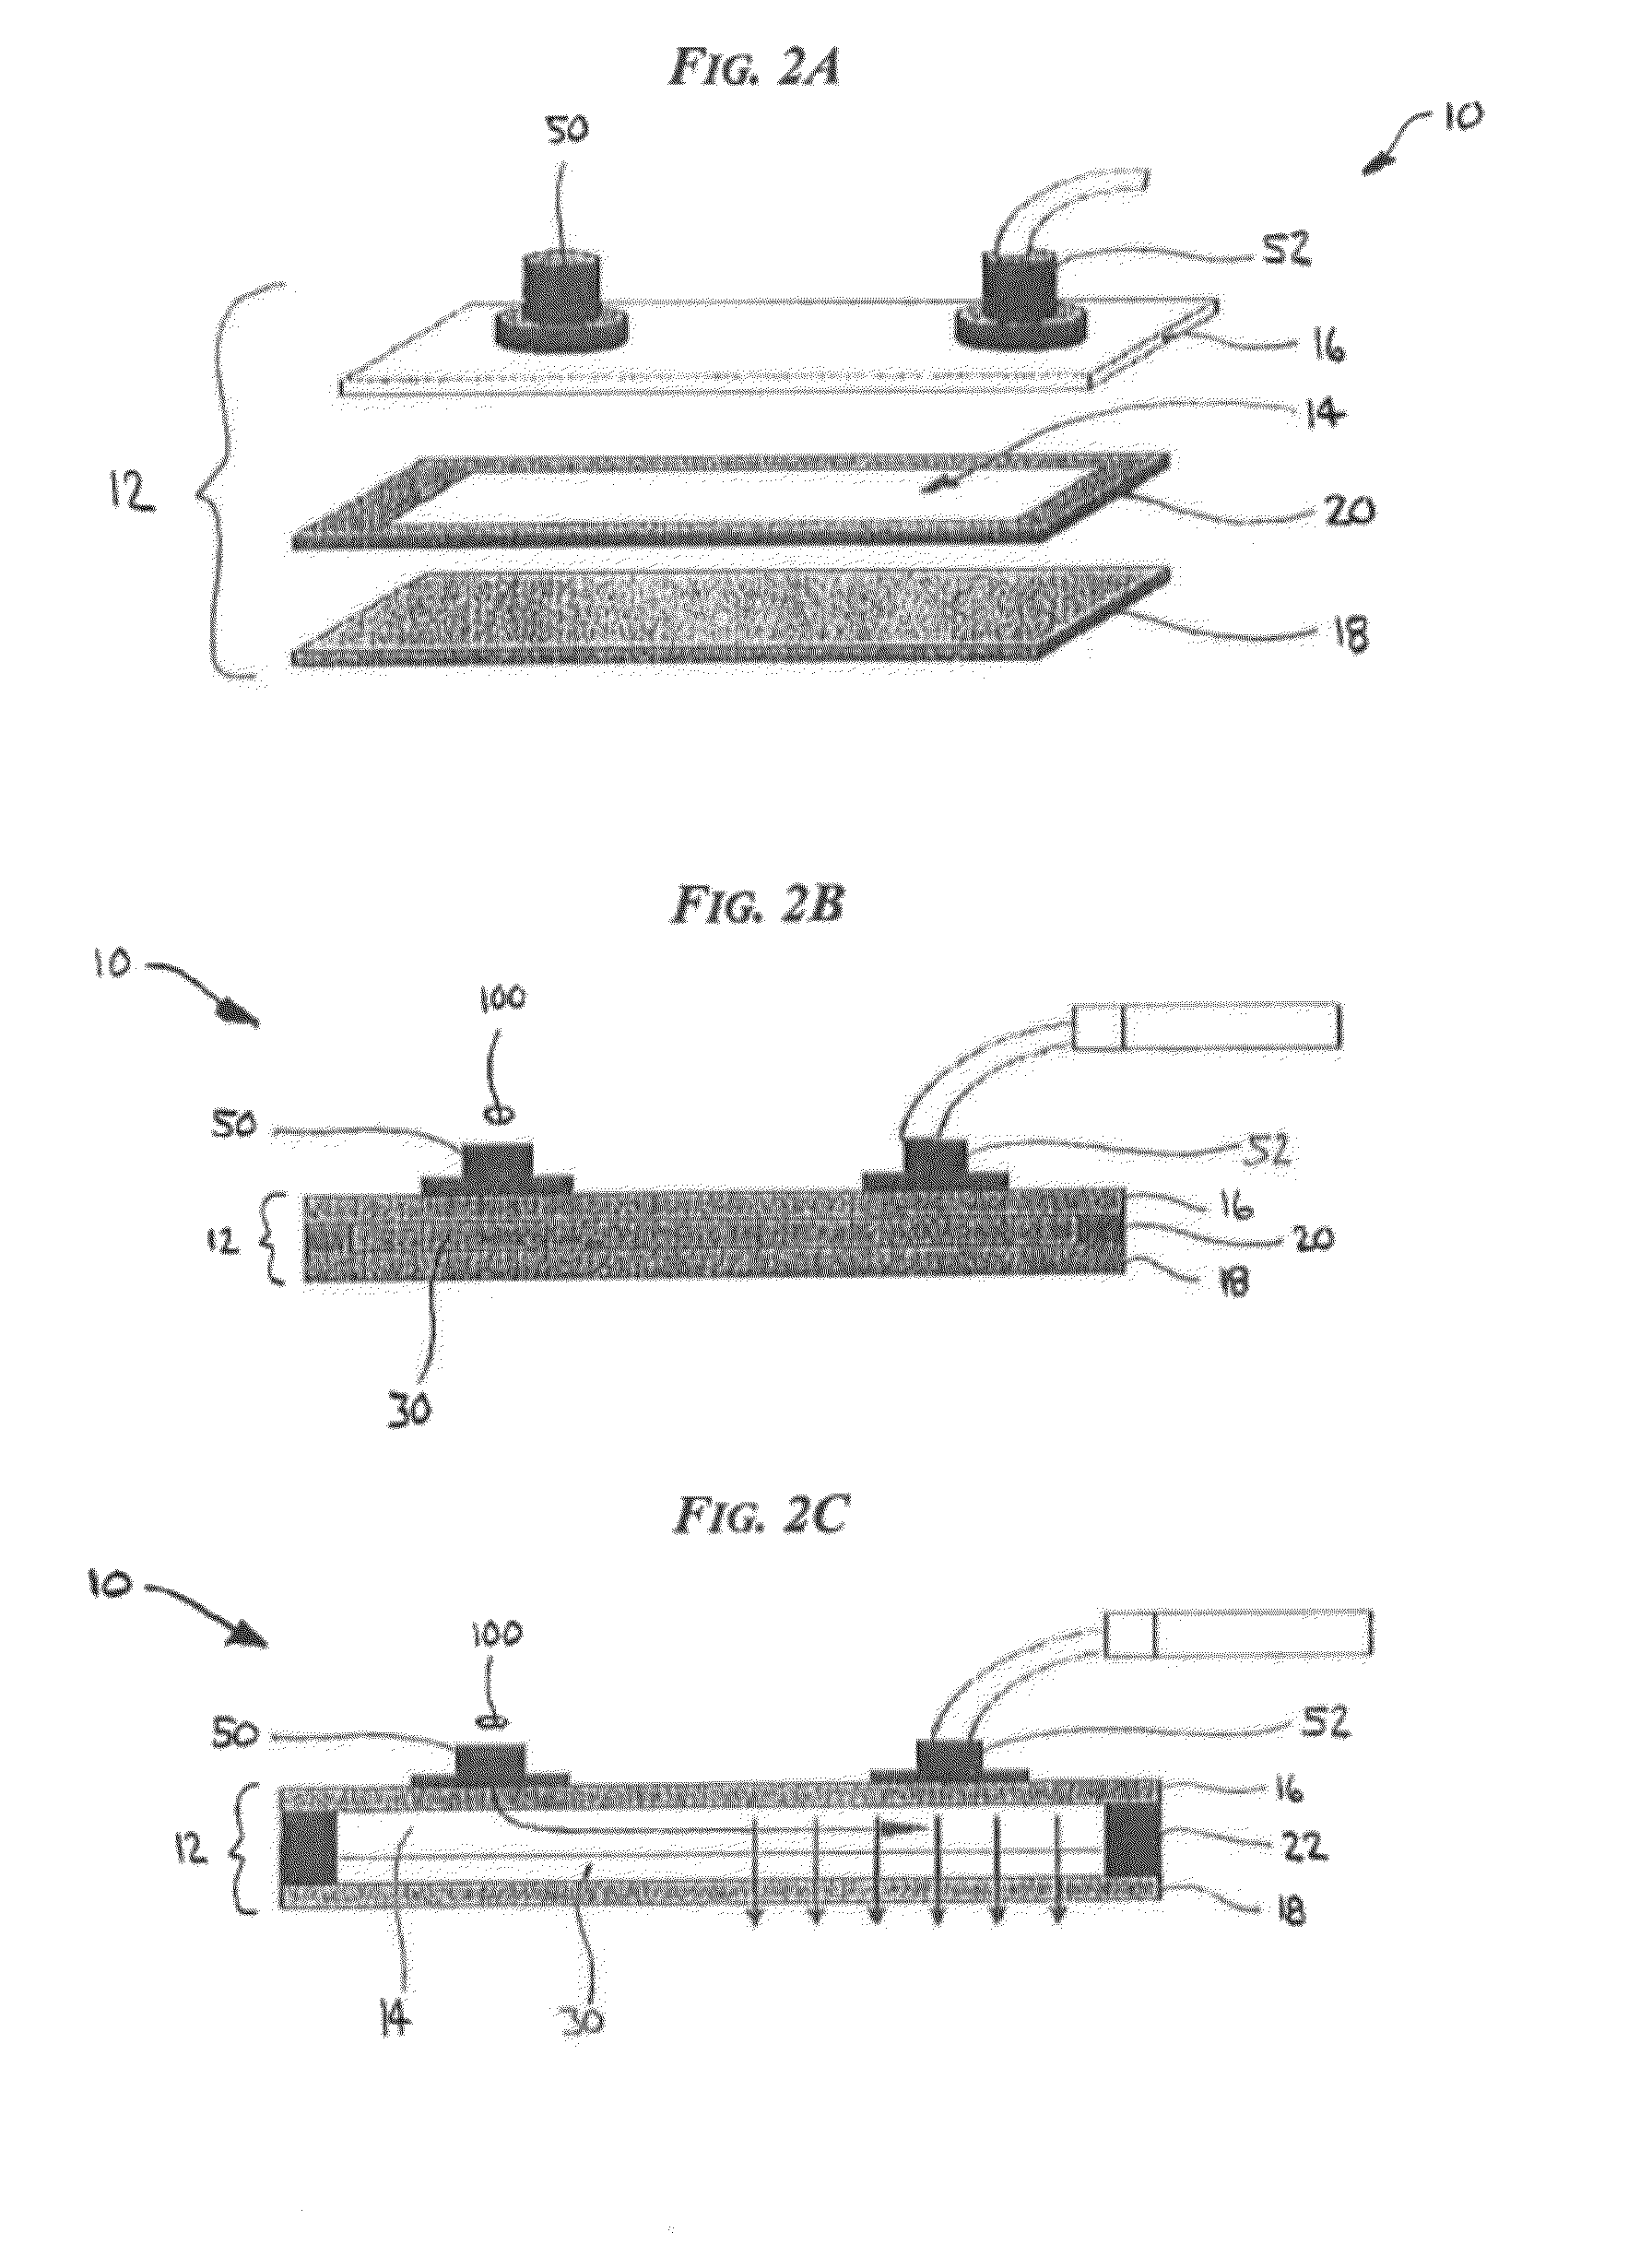 Devices and processes for analyzing nucleic acid damage and repair using electrophoresis